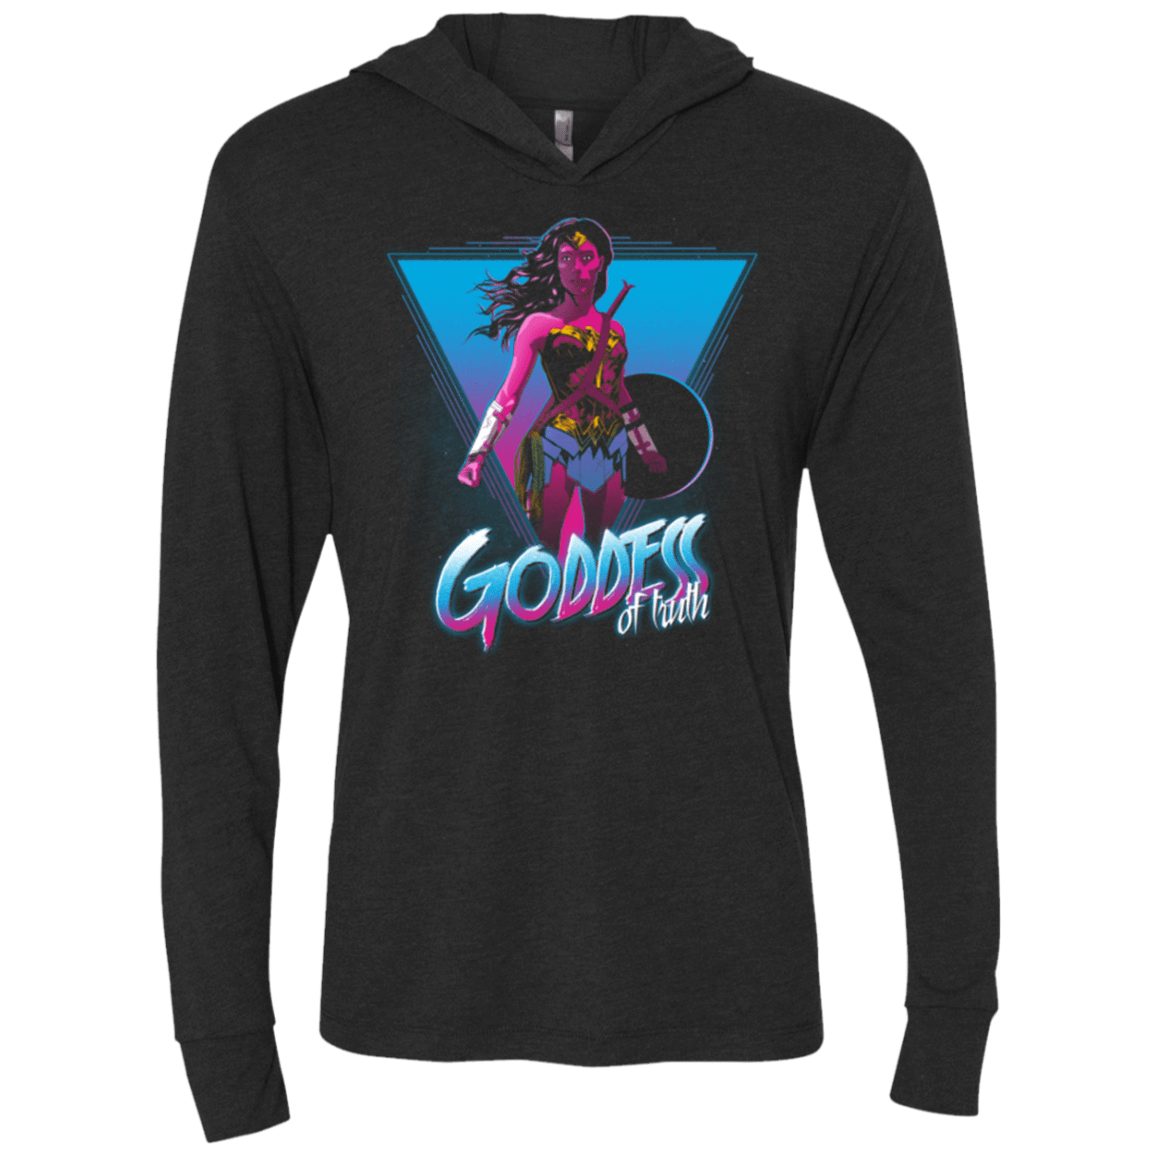 T-Shirts Vintage Black / X-Small Goddess of truth Triblend Long Sleeve Hoodie Tee